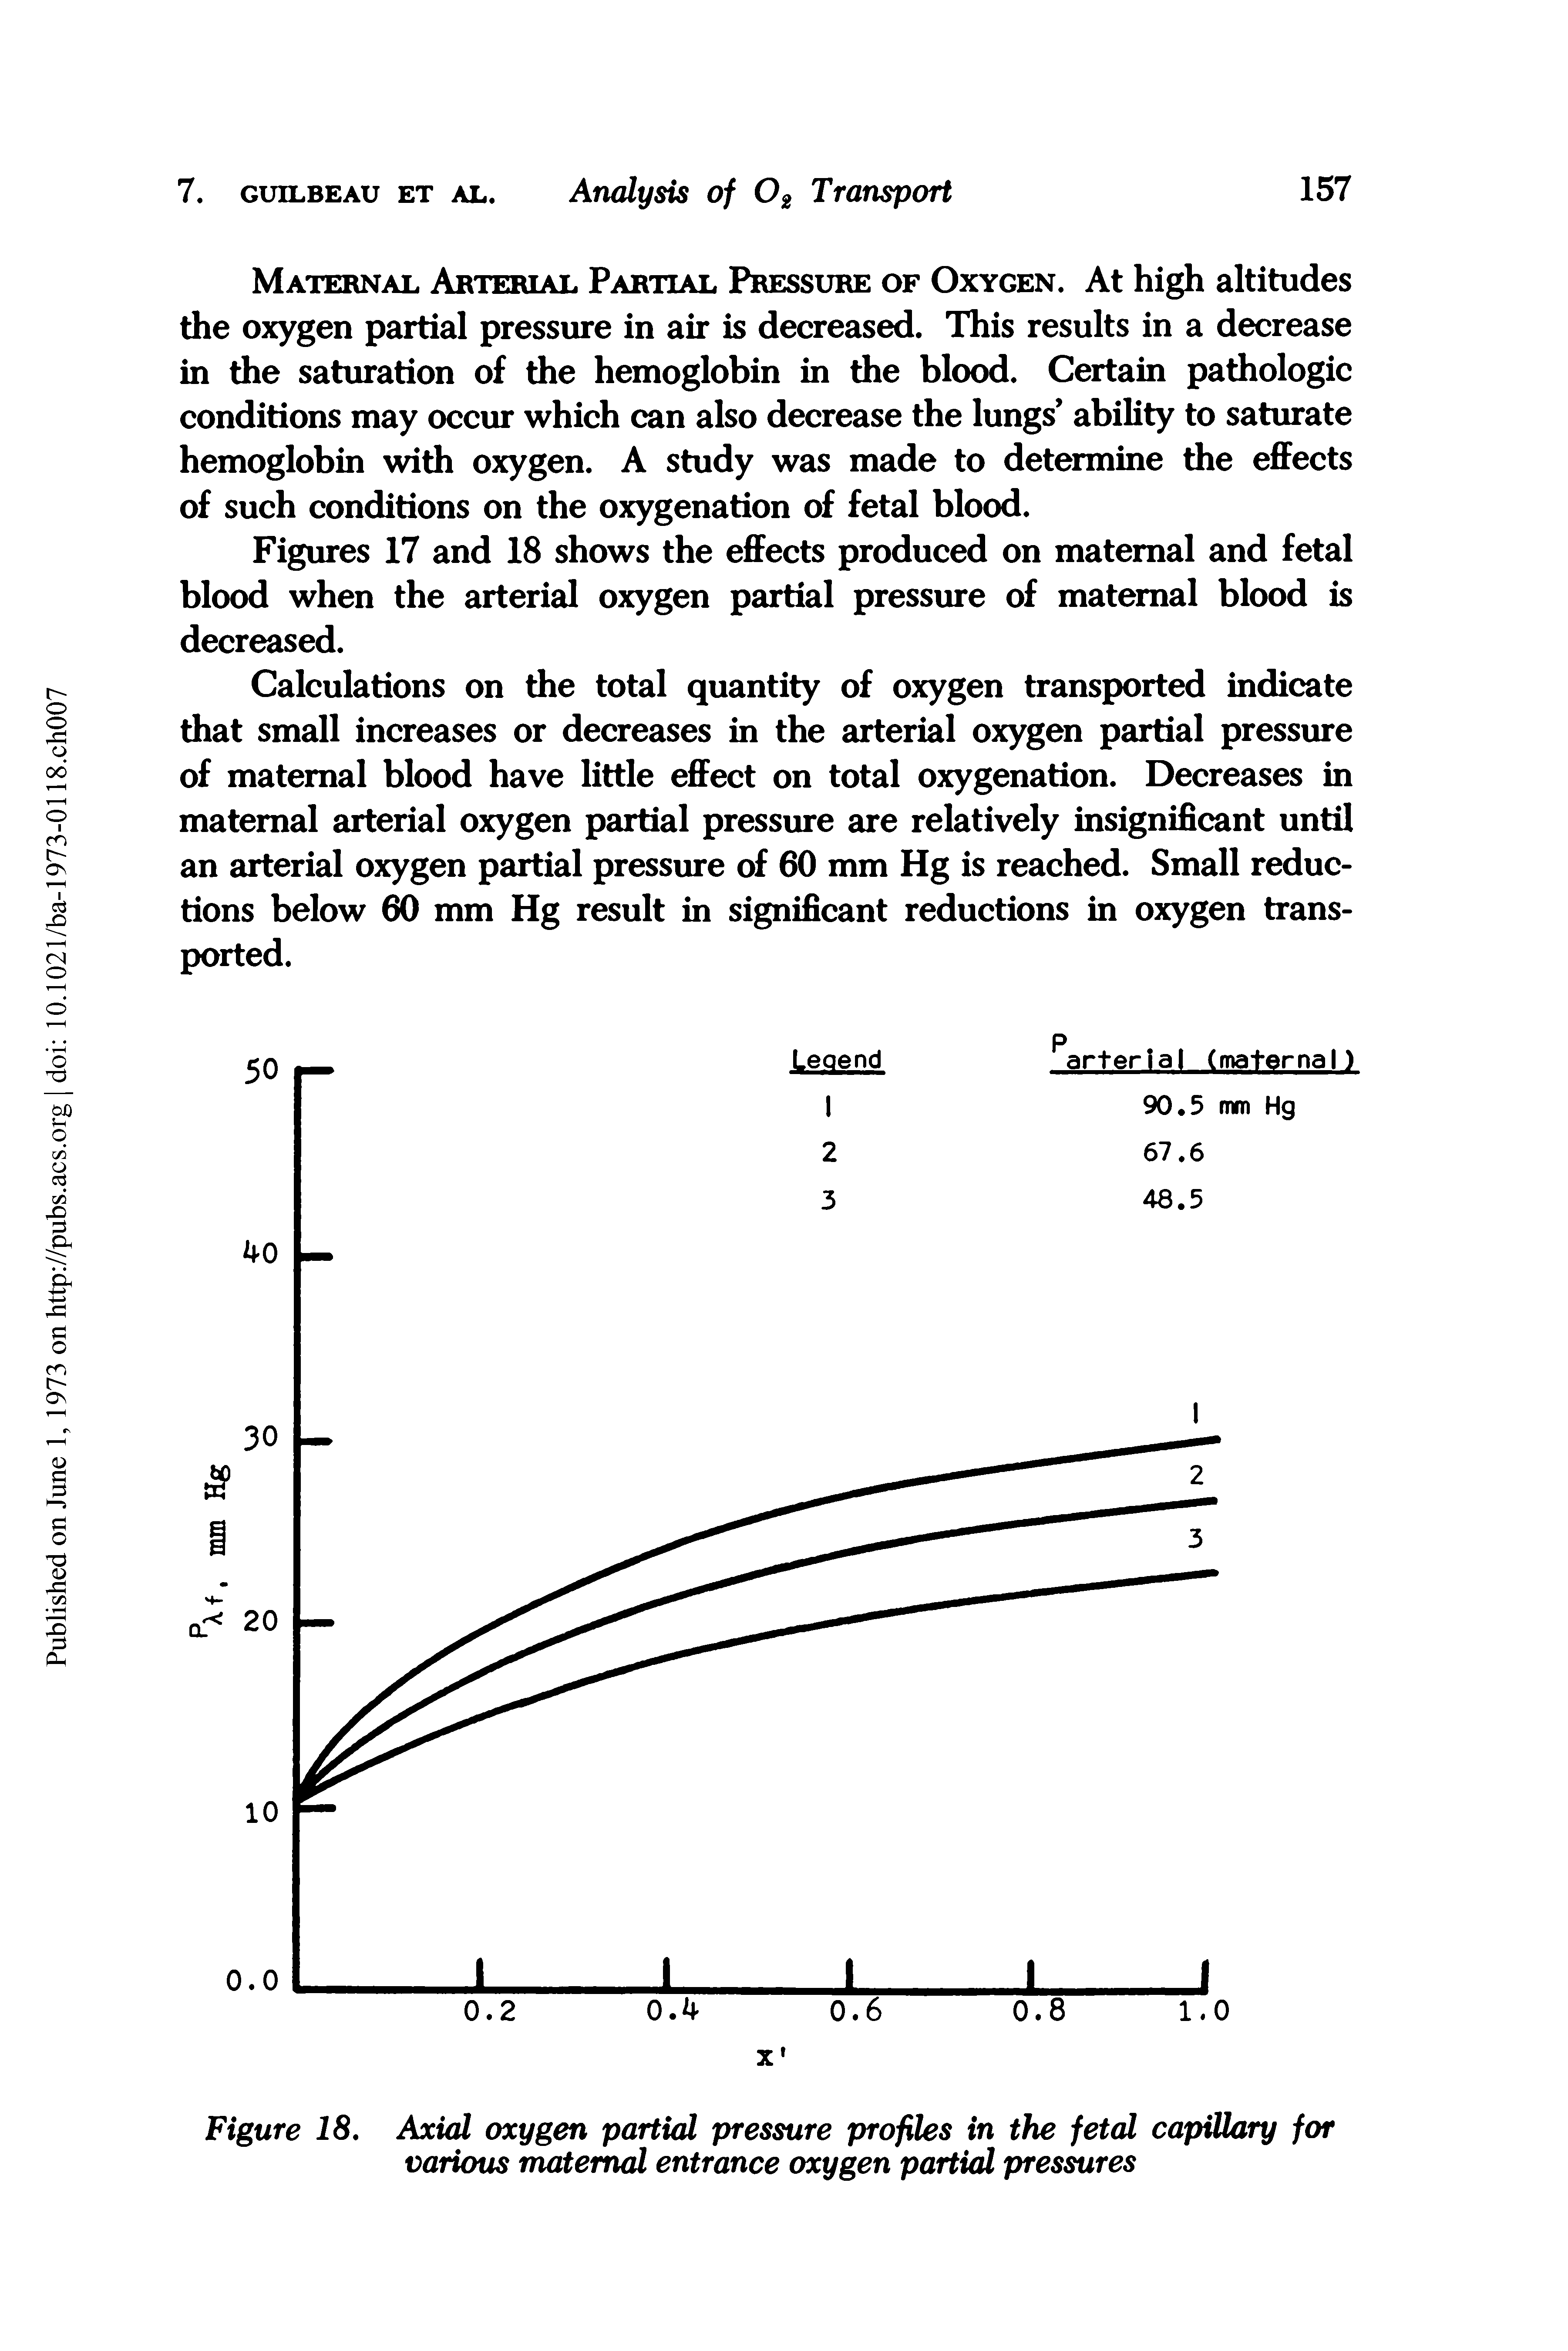 Figures 17 and 18 shows the effects produced on maternal and fetal blood when the arterial oxygen partial pressure of maternal blood is decreased.